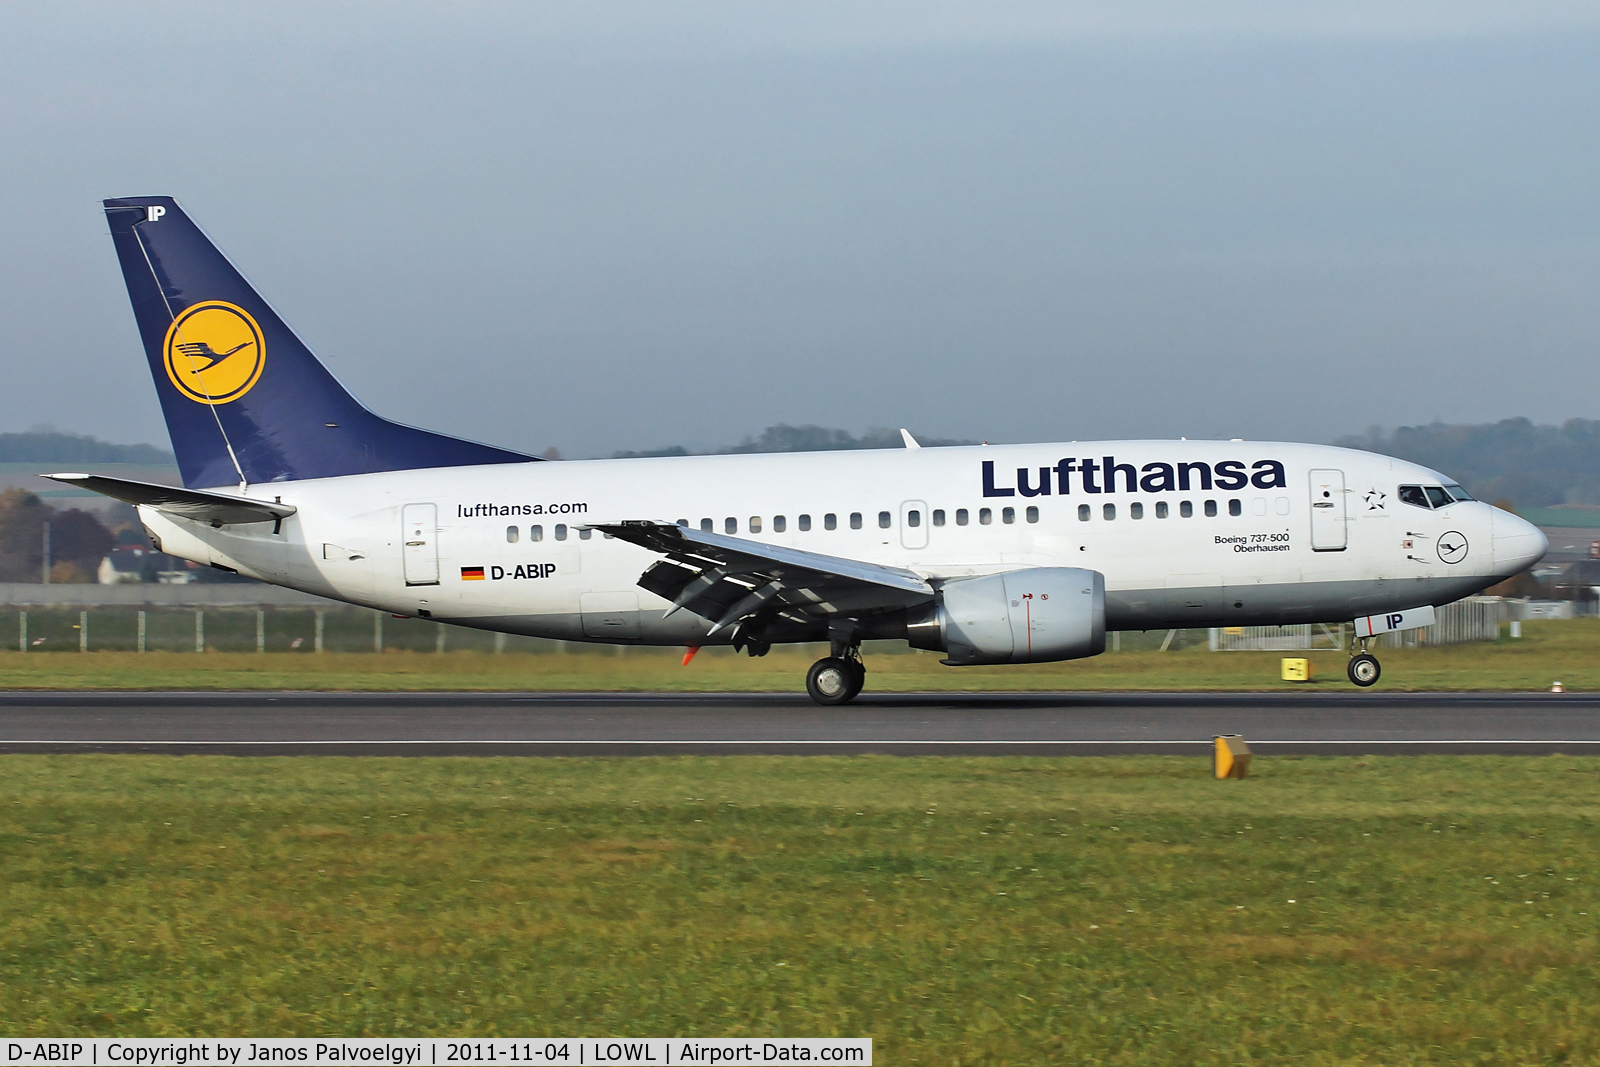 D-ABIP, 1991 Boeing 737-530 C/N 24940, Lufthansa Boeing B737-530 landing in LOWL/LNZ (first picture with my new SONY A77 !)